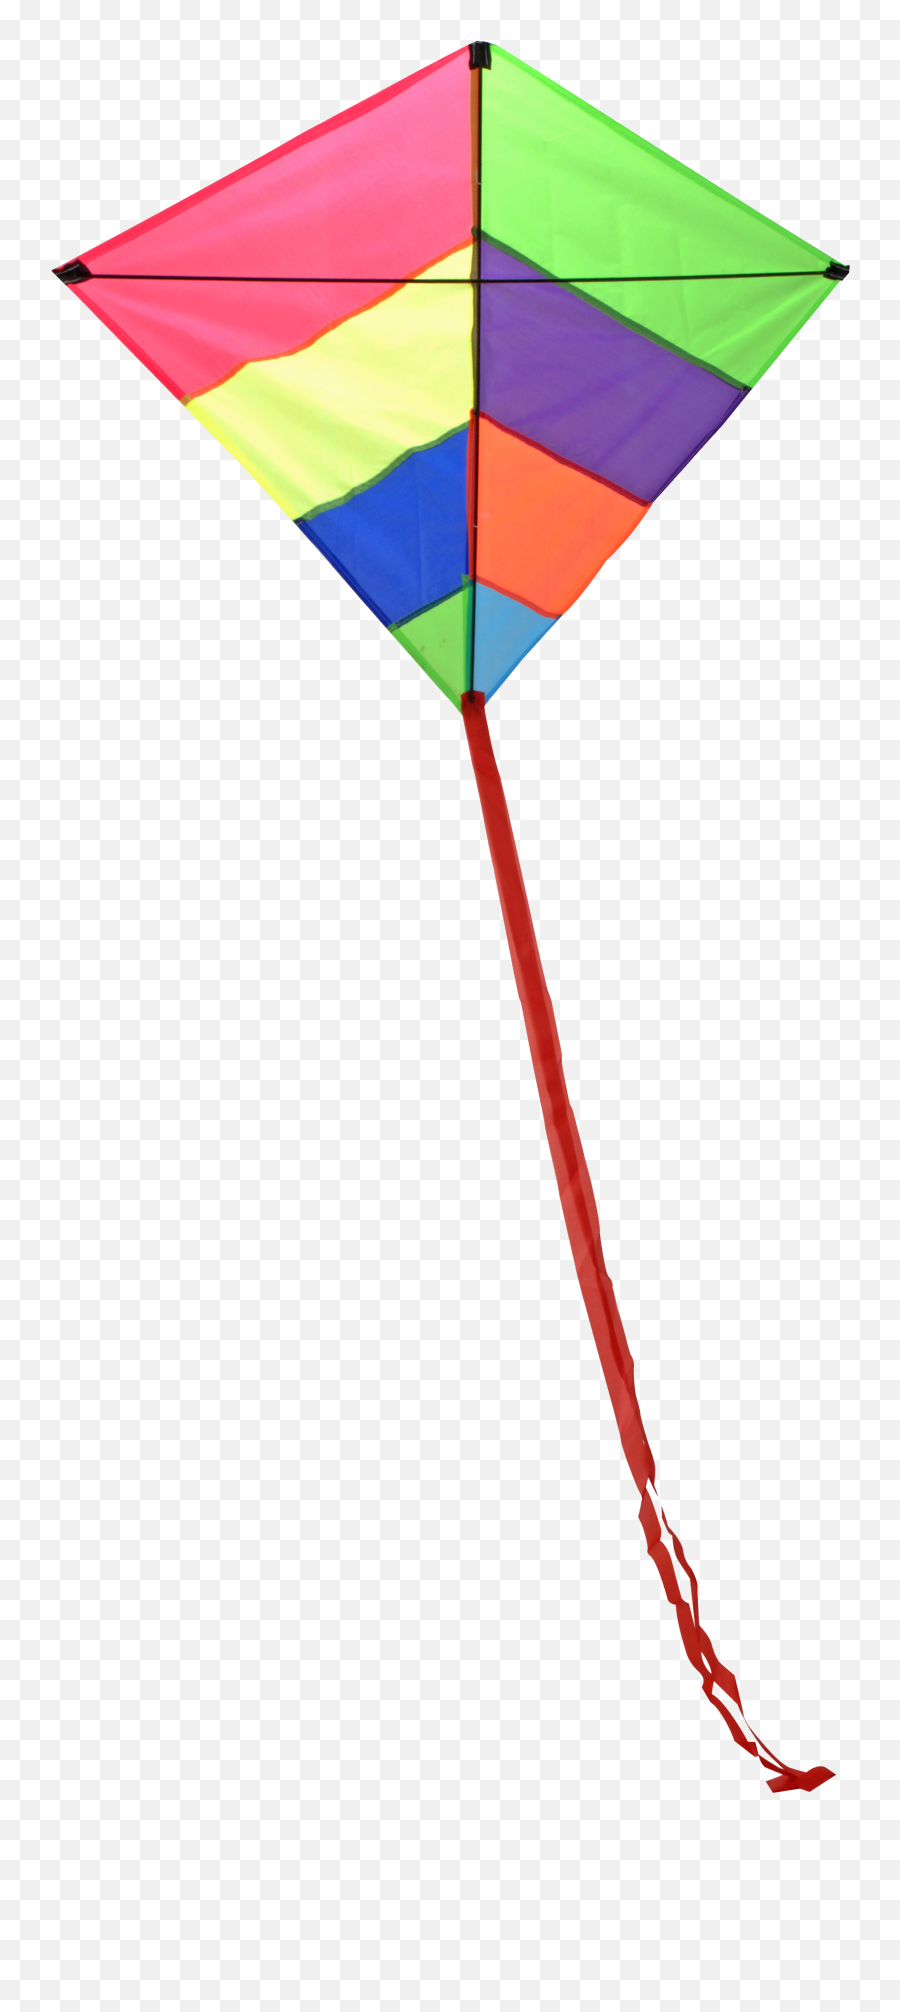 Kite Png - 100 Kb Kite With Transparent Background,Kite Png